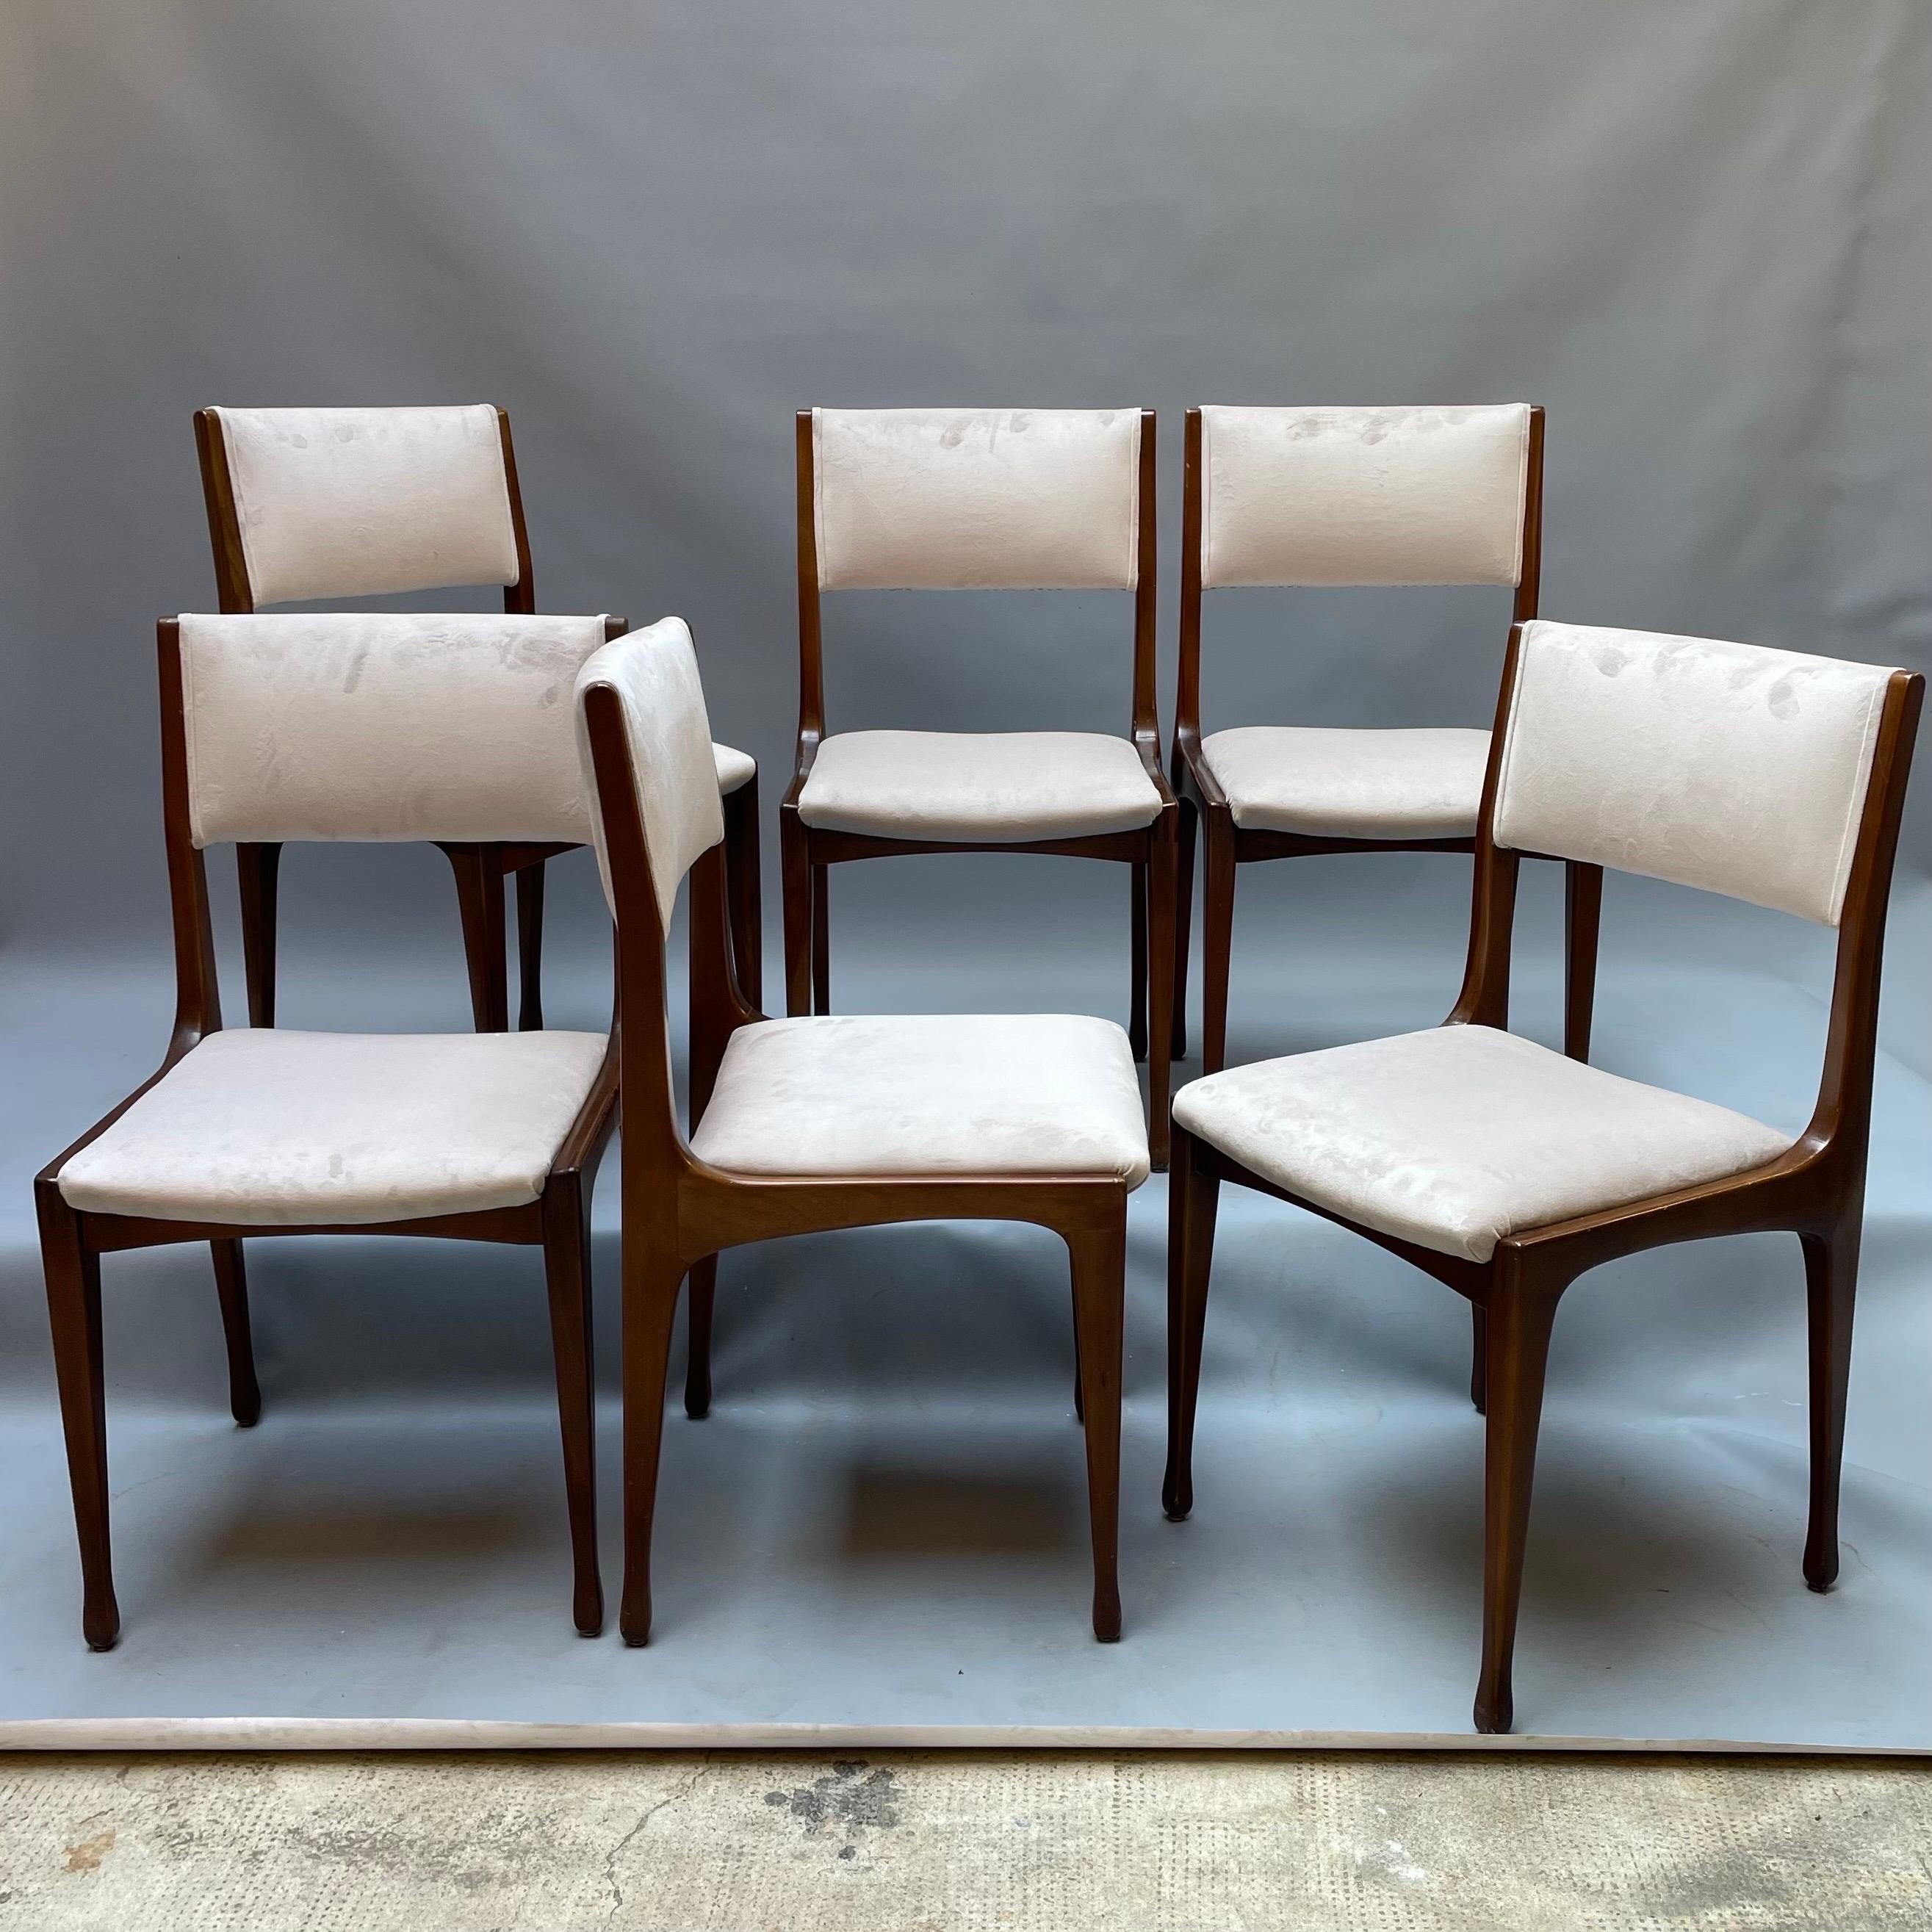 Chair model 693 production Cassina design Carlo de Carli, year 1958. Walnut wood frame, seat and back upholstered in rubber covered in warm white velvet. Carlo De Carli (Milan, 1910 – 1999) was, as well as a designer, promoter of Italian furniture,